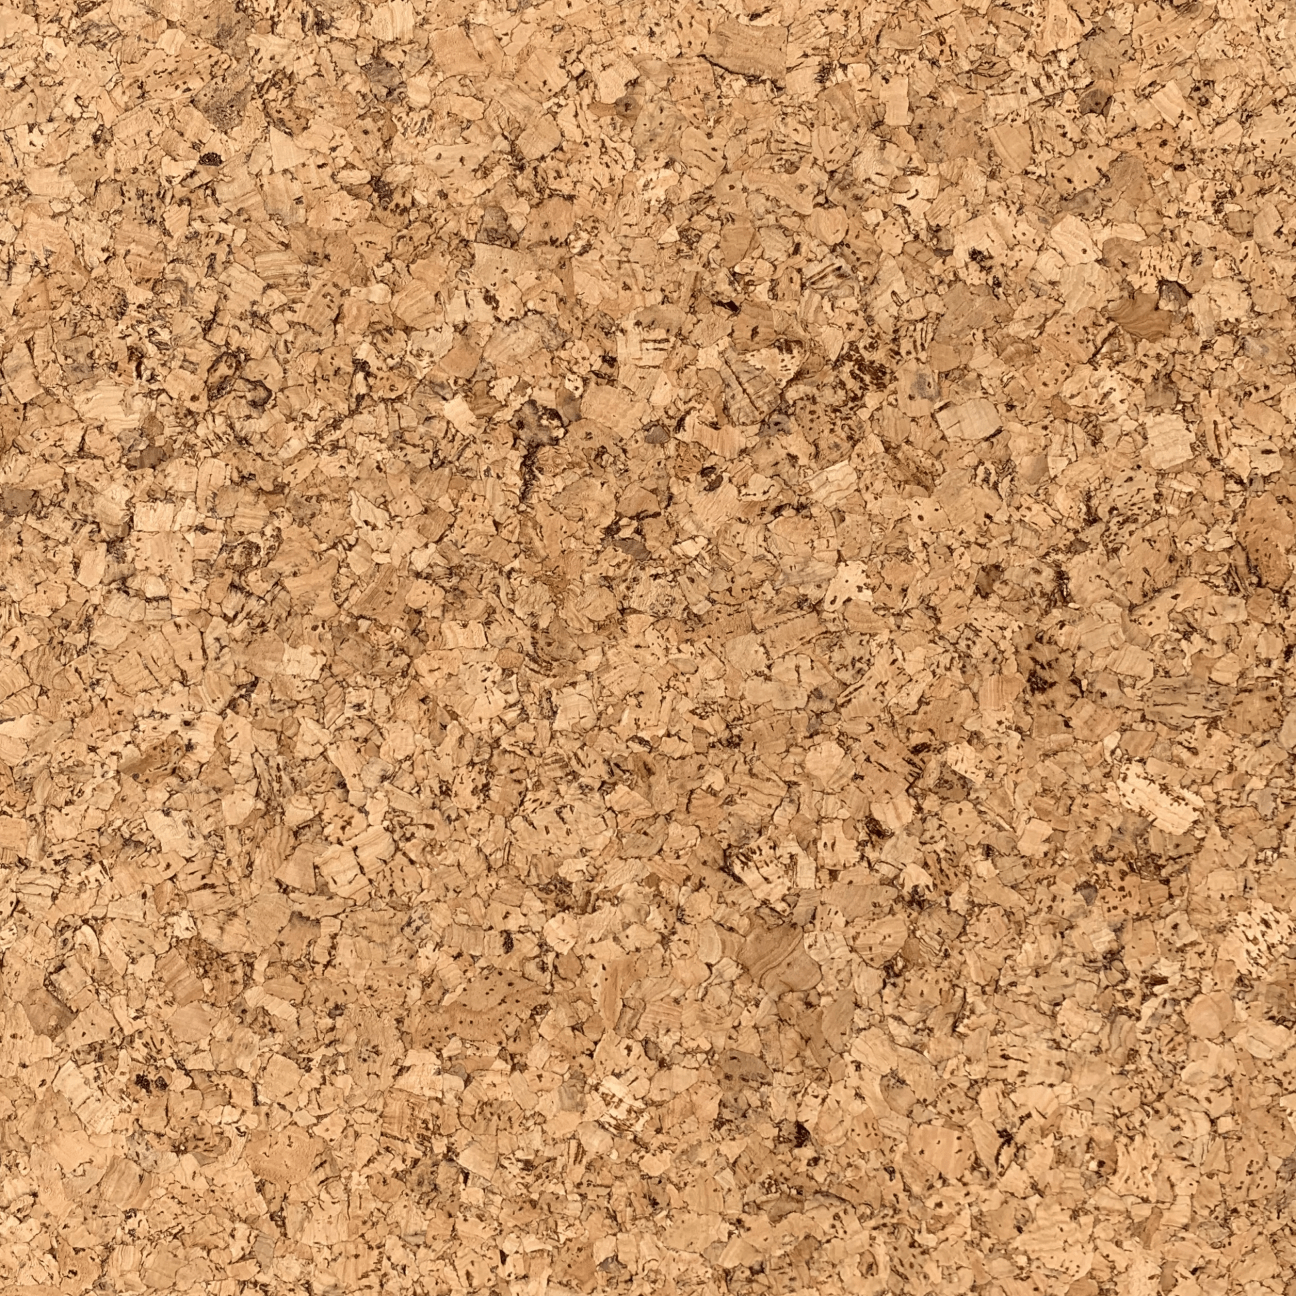 Lisbon Patter: The traditional cork pattern where granulated cork compressed together into an corkboard look that is a mainstay of mid-century modern design.